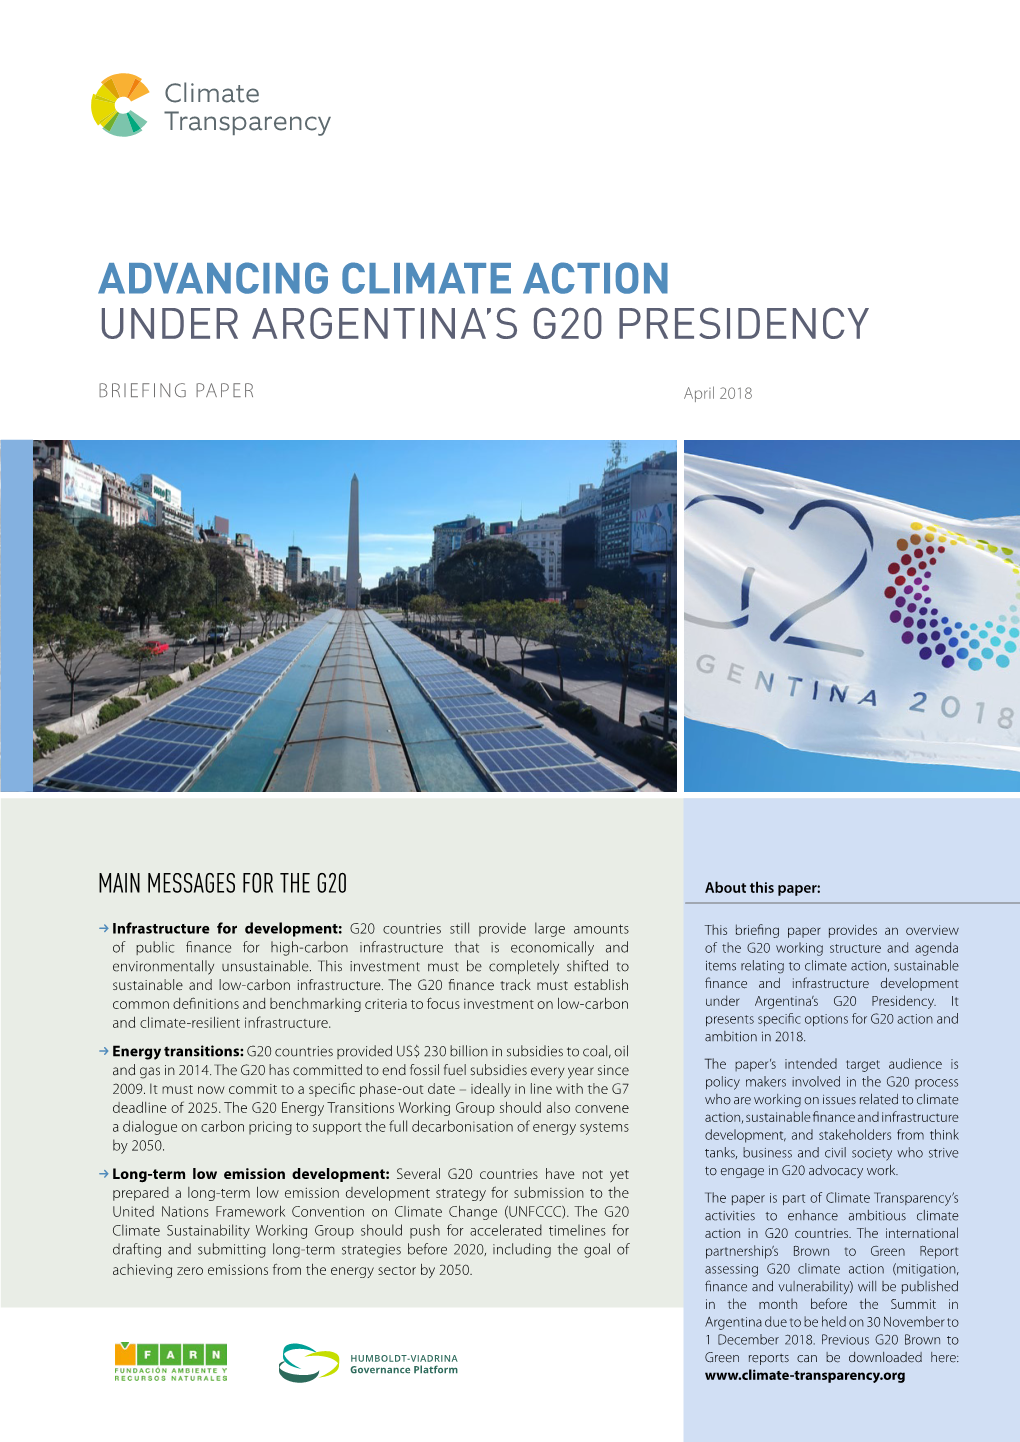 Download Briefing Paper “Advancing Climate Action Under Argentina's